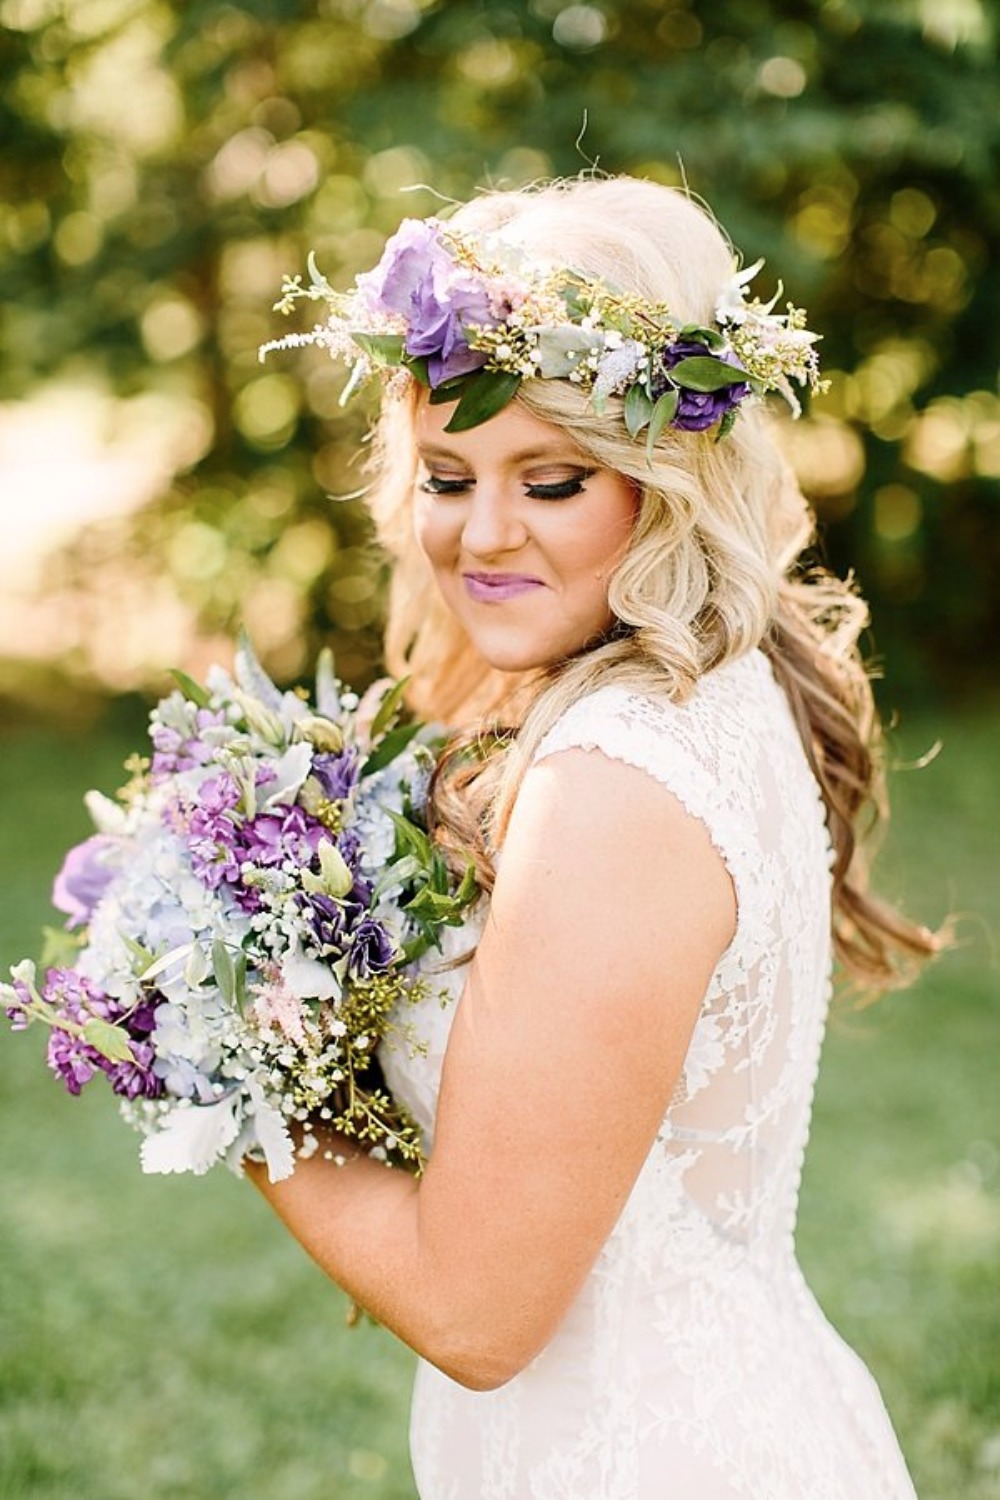 wedding hair and makeup ideas plus flower halow